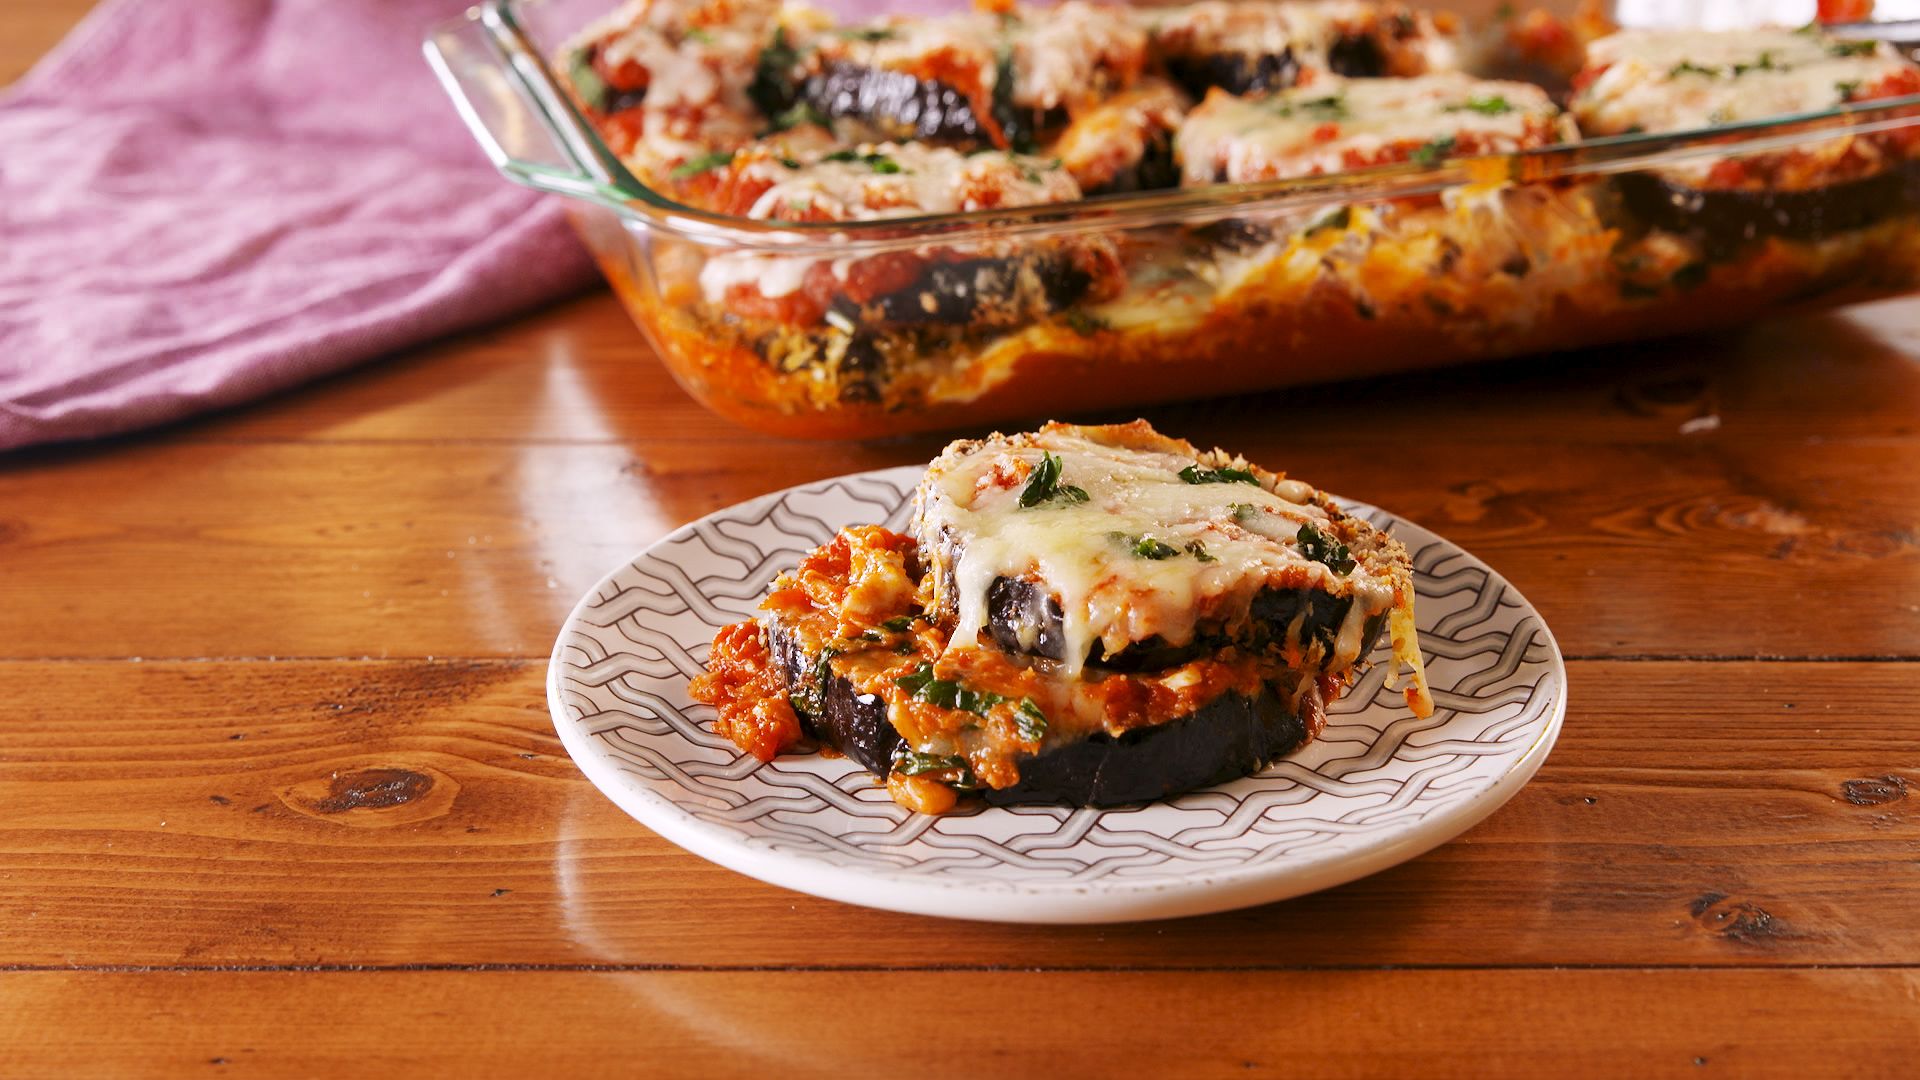 Best Baked Eggplant Parm Recipe How To Make Baked Eggplant Parm